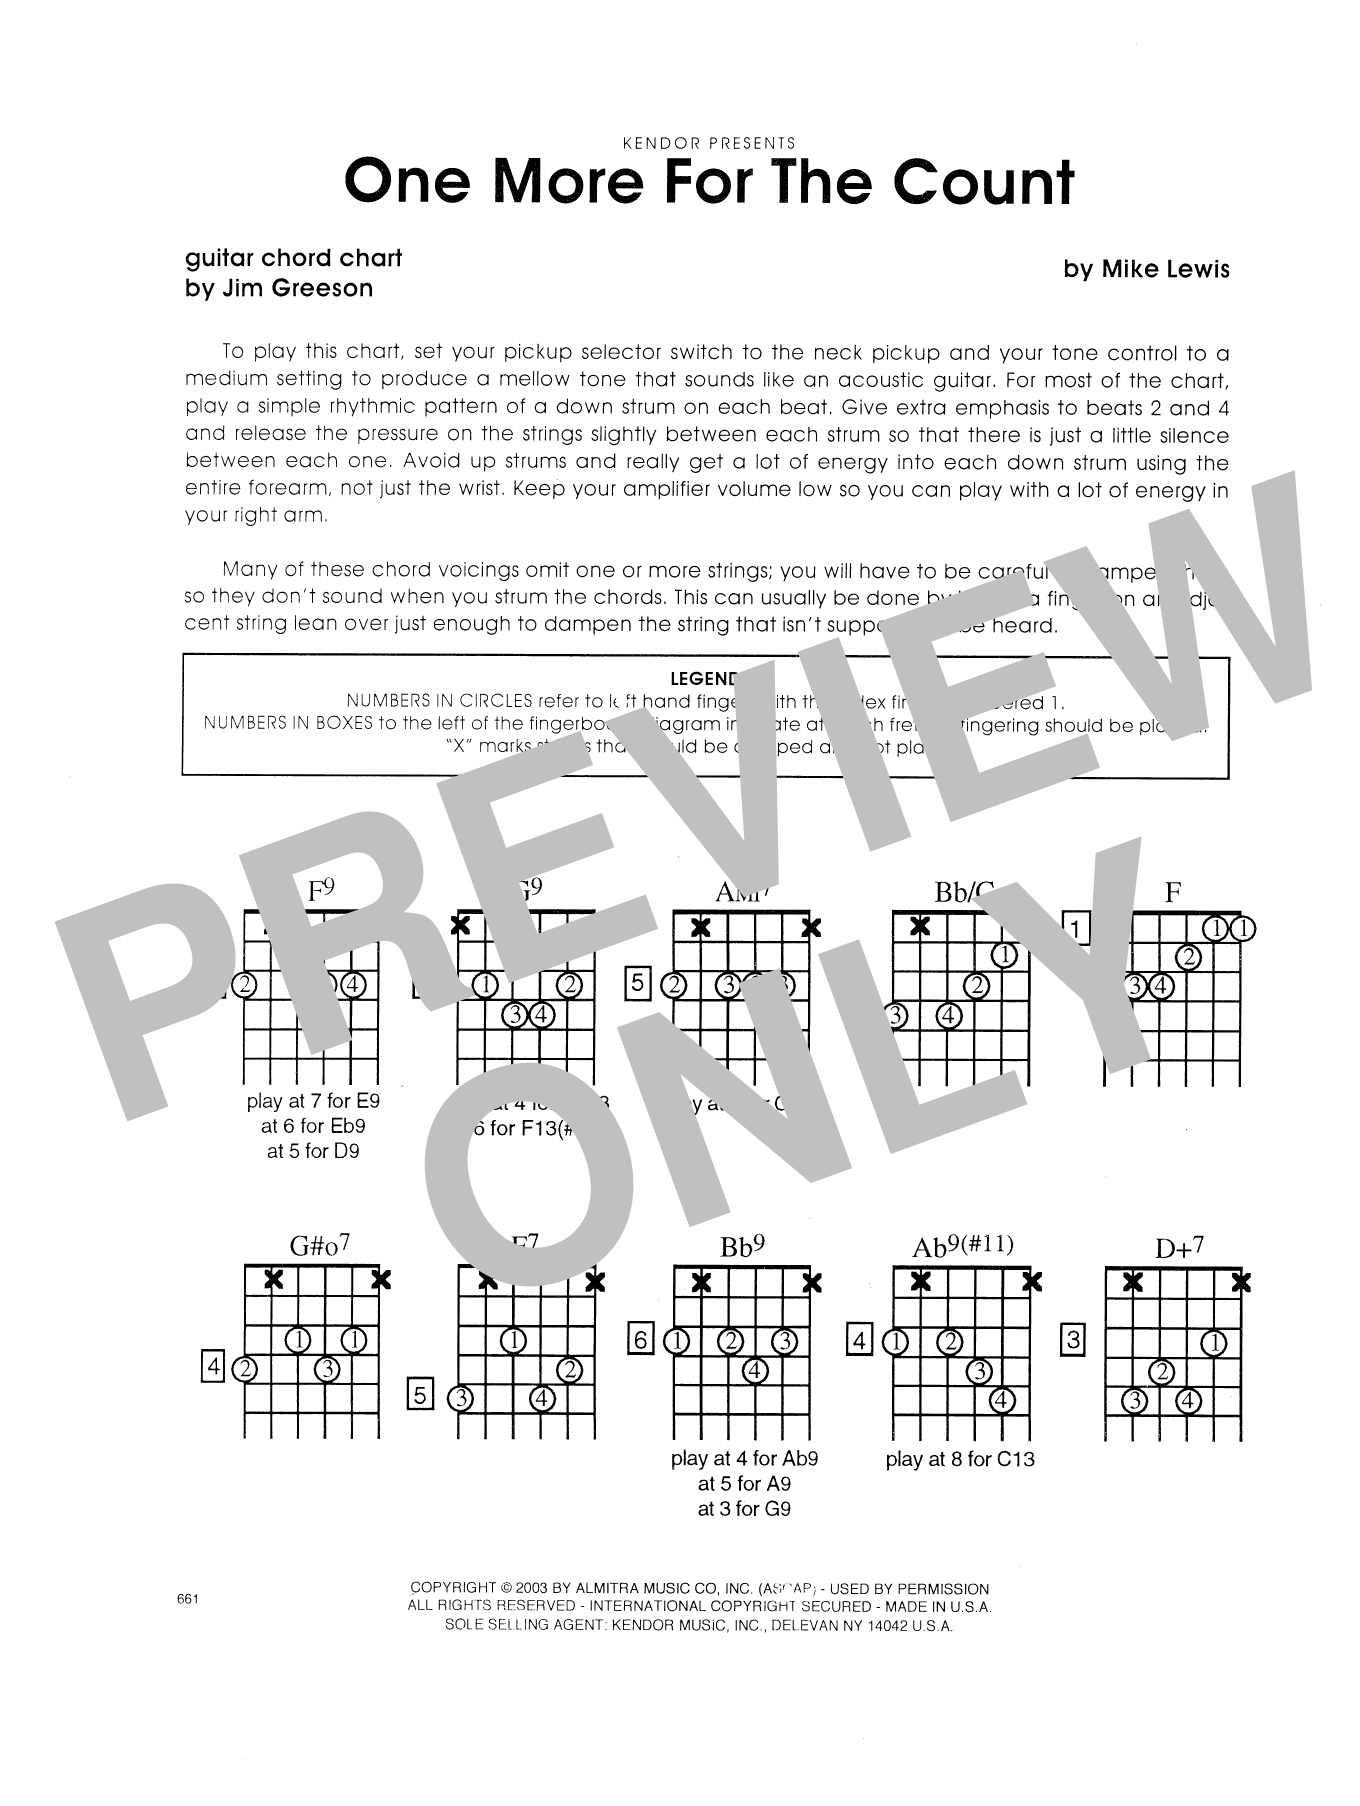 Download Mike Lewis One More For The Count - Guitar Chord C Sheet Music